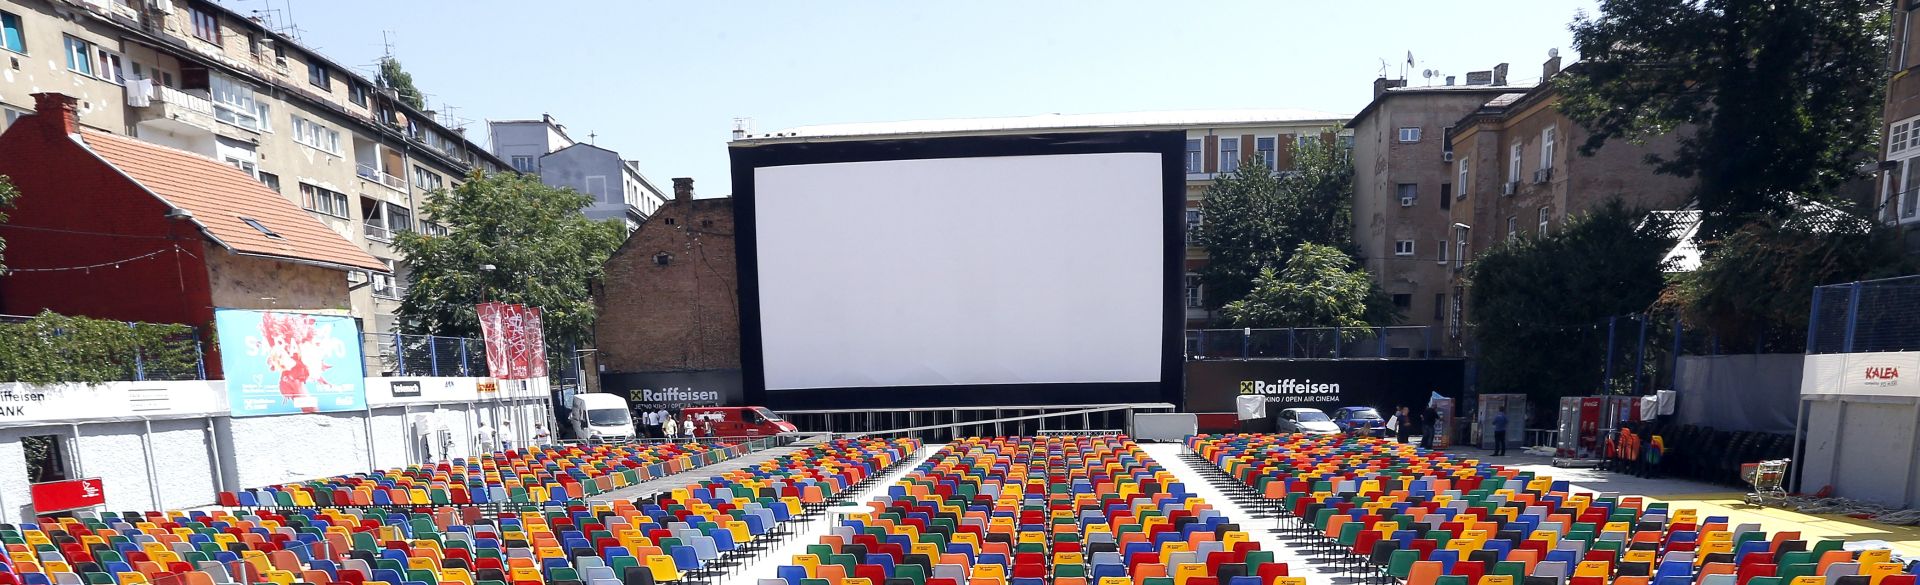 epa06135237 Seats are arranged at an open-air cinema in preparation for the 23rd Sarajevo Film Festival in Sarajevo, Bosnia and Herzegovina, 10 August 2017. The festival runs from 11 to 18 August and will present more than 235 movies.  EPA/FEHIM DEMIR